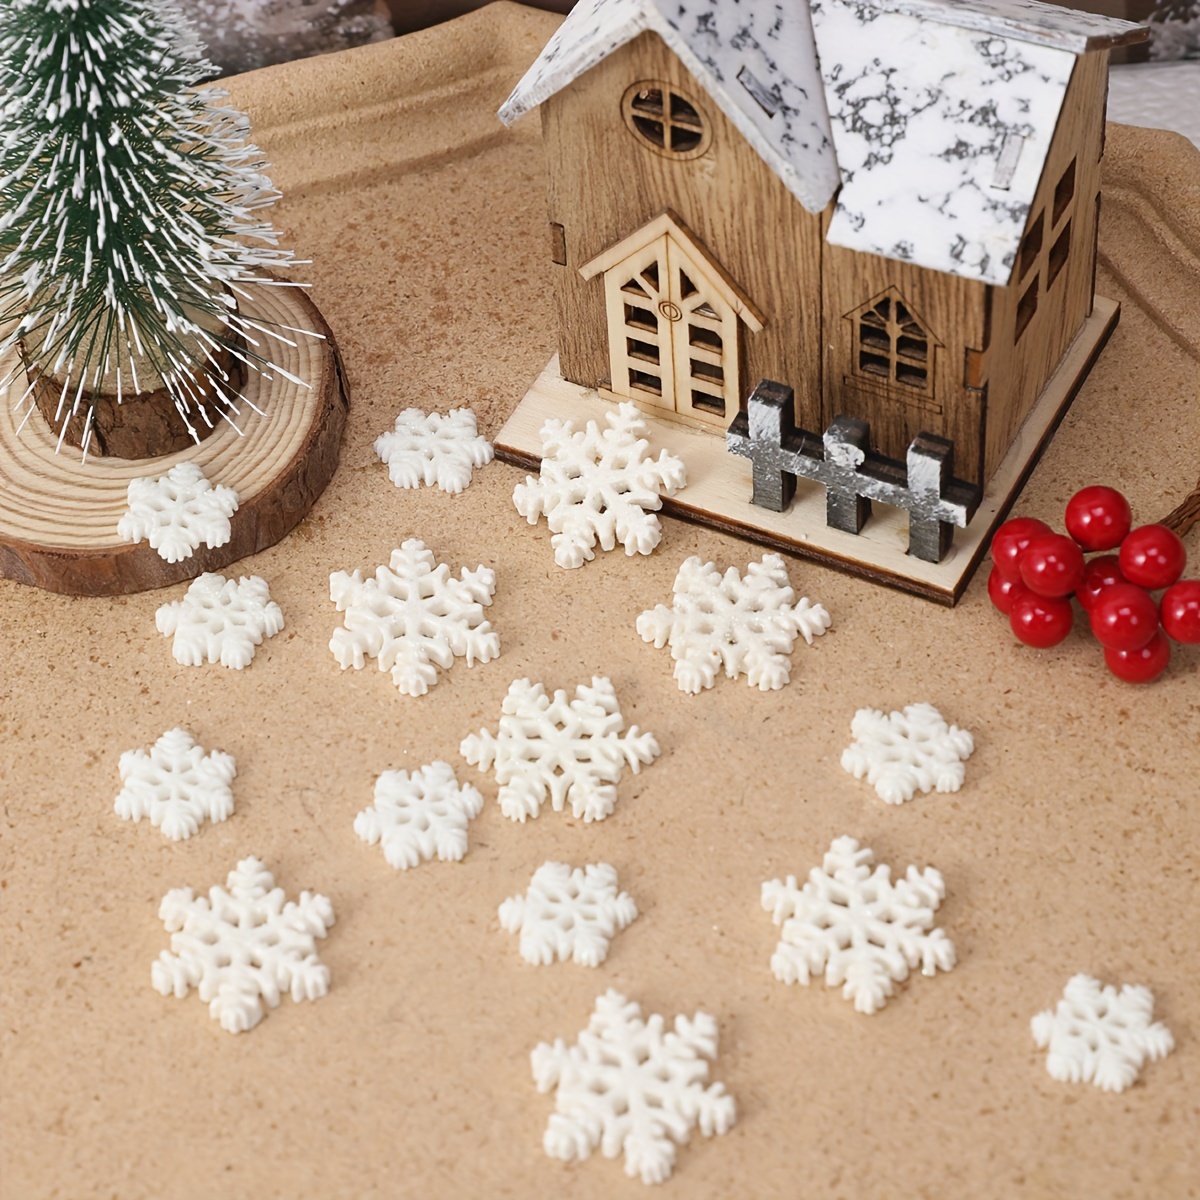 20pcs Moss Micro Landscape Ornament,Christmas Snowflakes Christmas Holiday  Decorations, Home Decoration Ornaments, (10pcs Large Snowflakes,10pcs Small